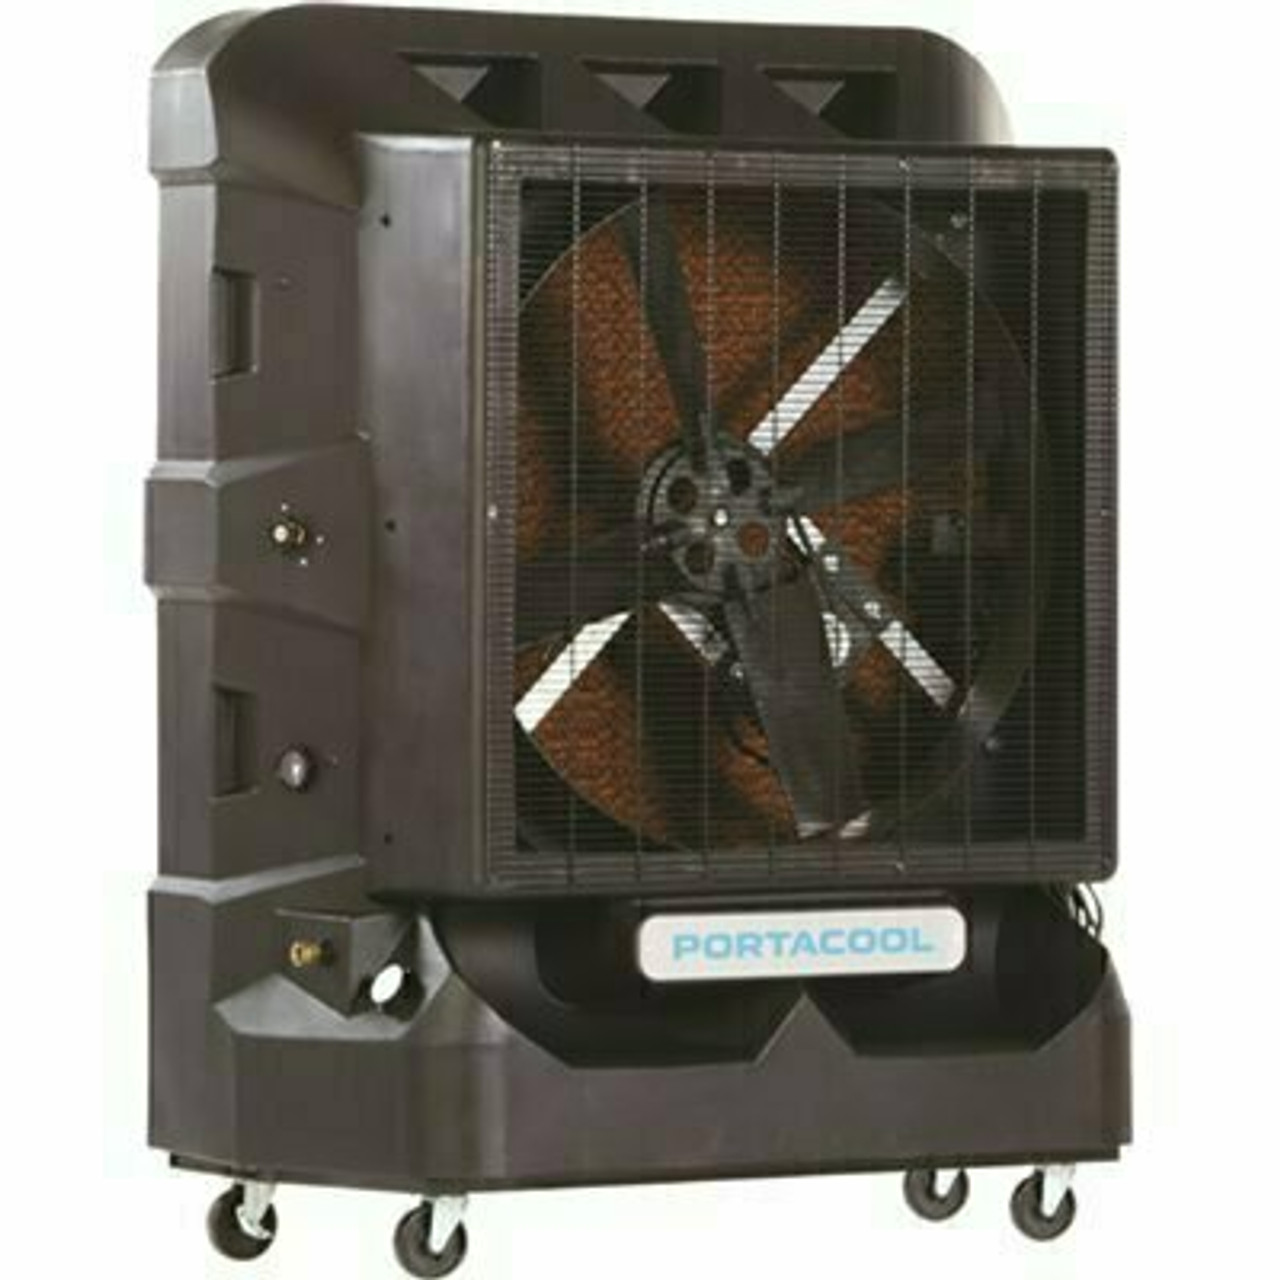 Portacool Cyclone 160 8000 Cfm 1-Speed Portable Evaporative Cooler For 2100 Sq. Ft. With 36 In. Fan Blade